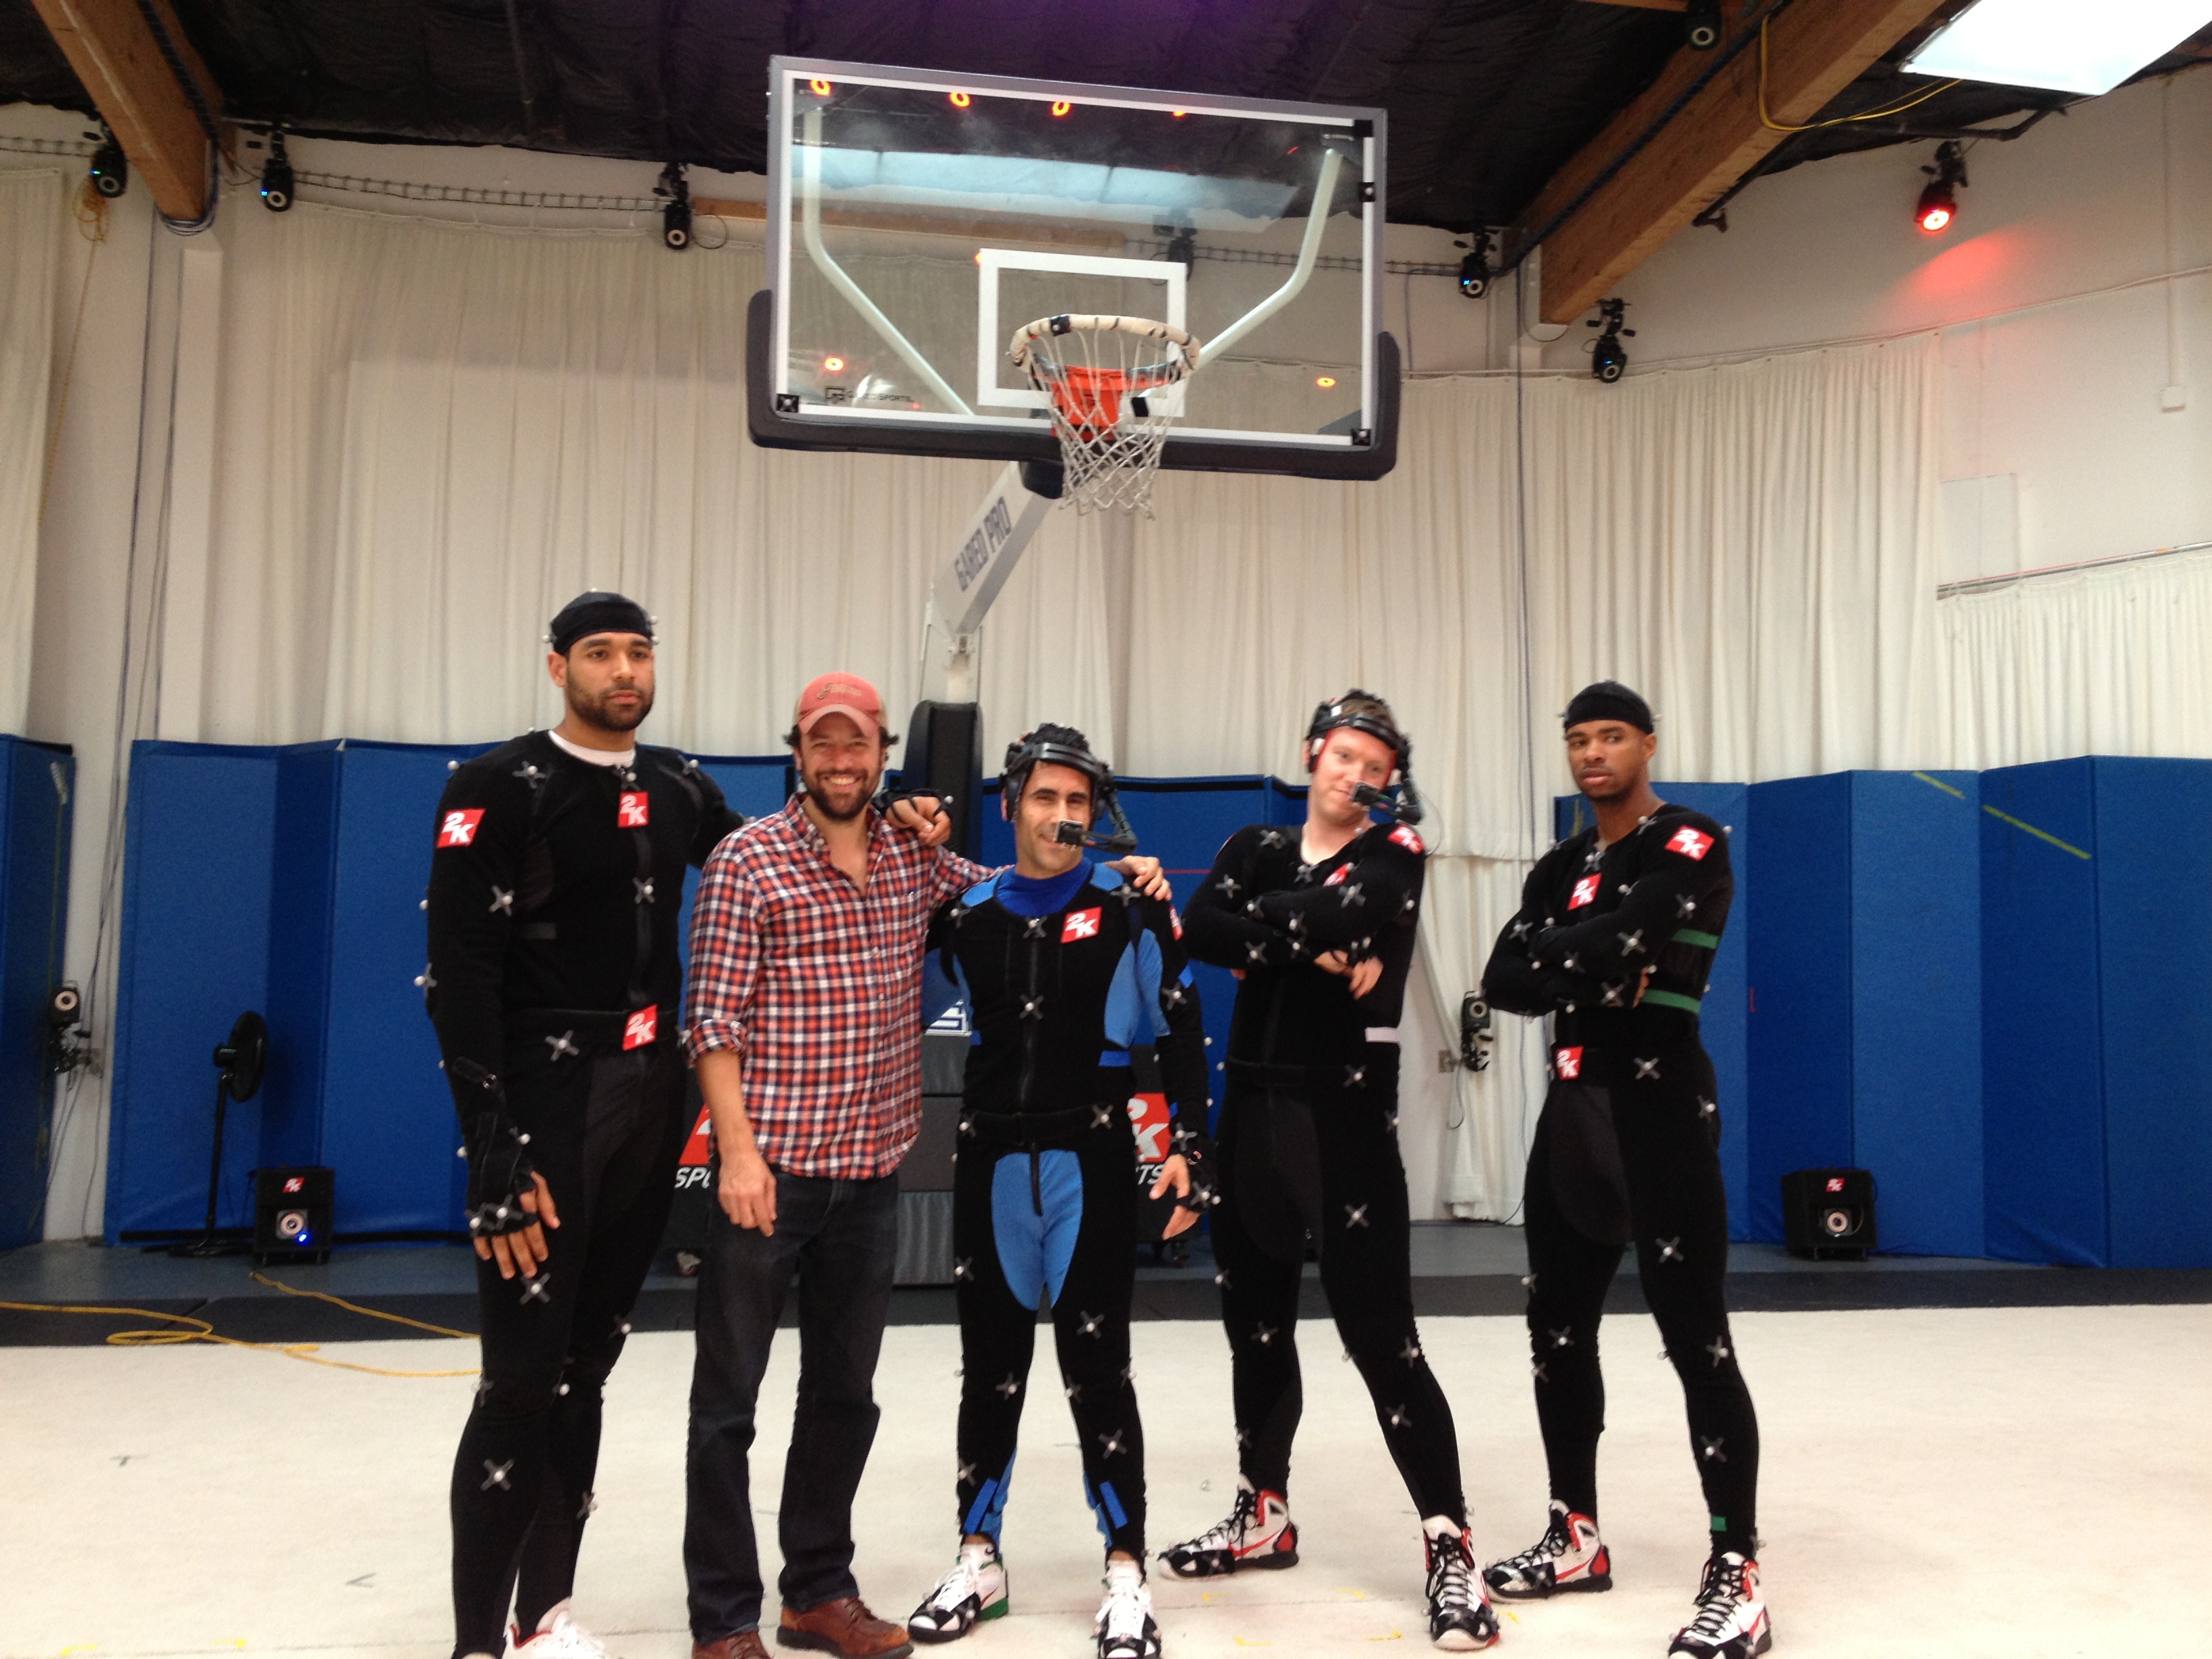 On set of NBA 2K14 at 2K games motion capture studio in Novato, CA. Pictured from Left to Right: 2K14 Motion Capture Player, Director Chris Papierniak, Trainer David Ojakian, MyPlayer Mark Middleton, 2K14 Motion Capture Player.